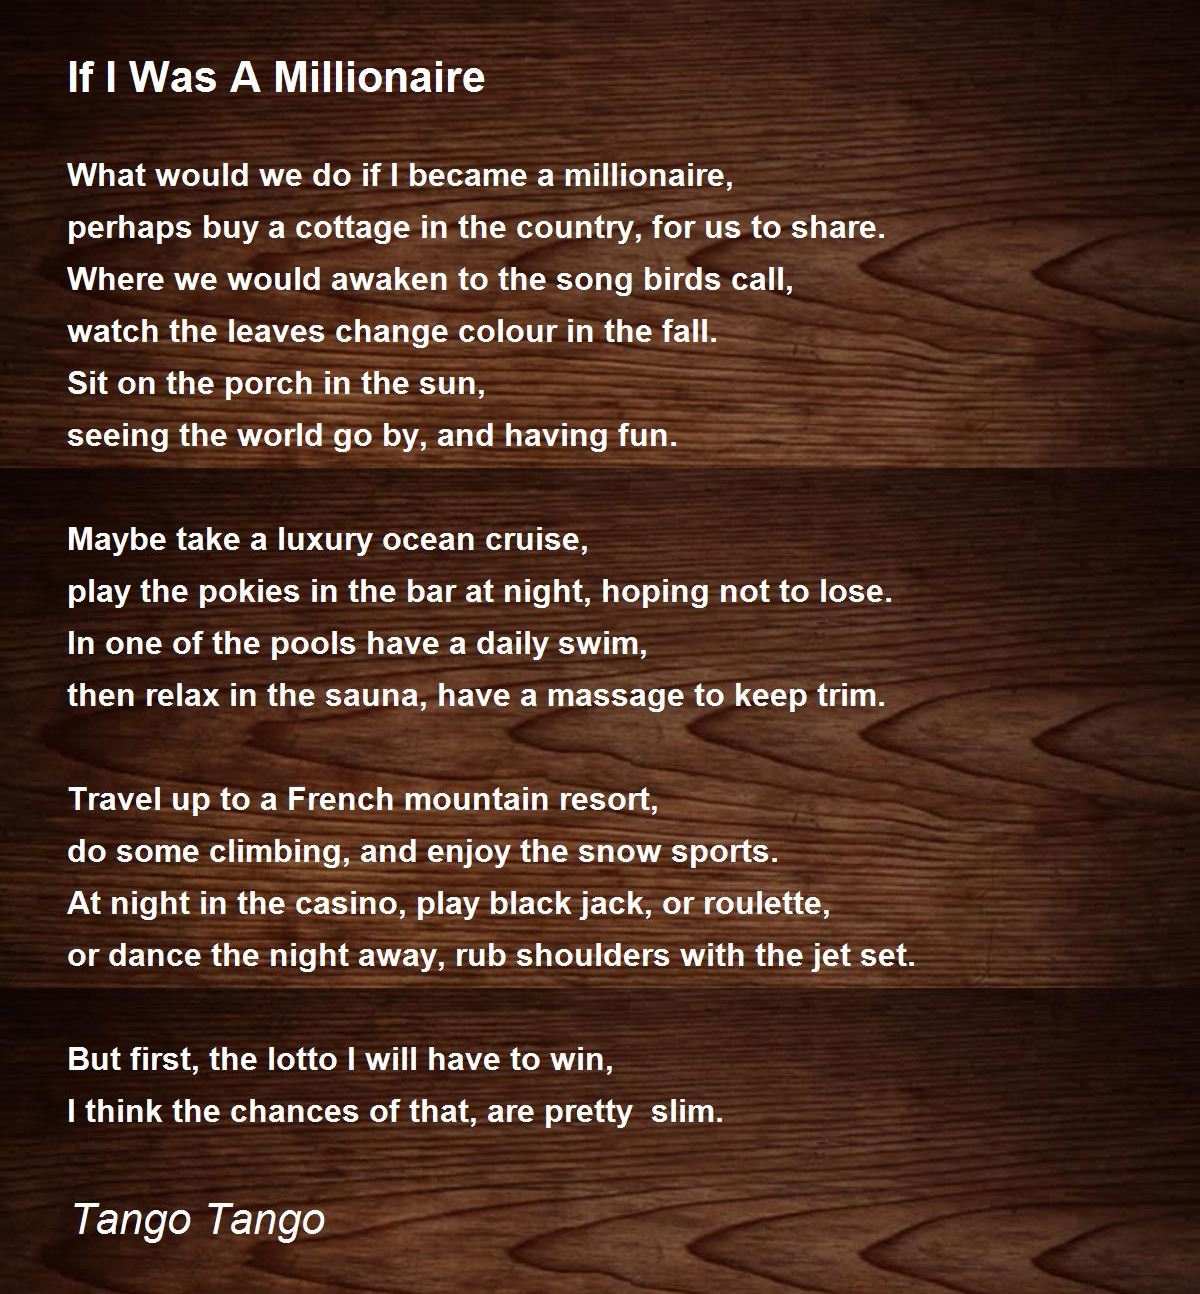 if you were a millionaire